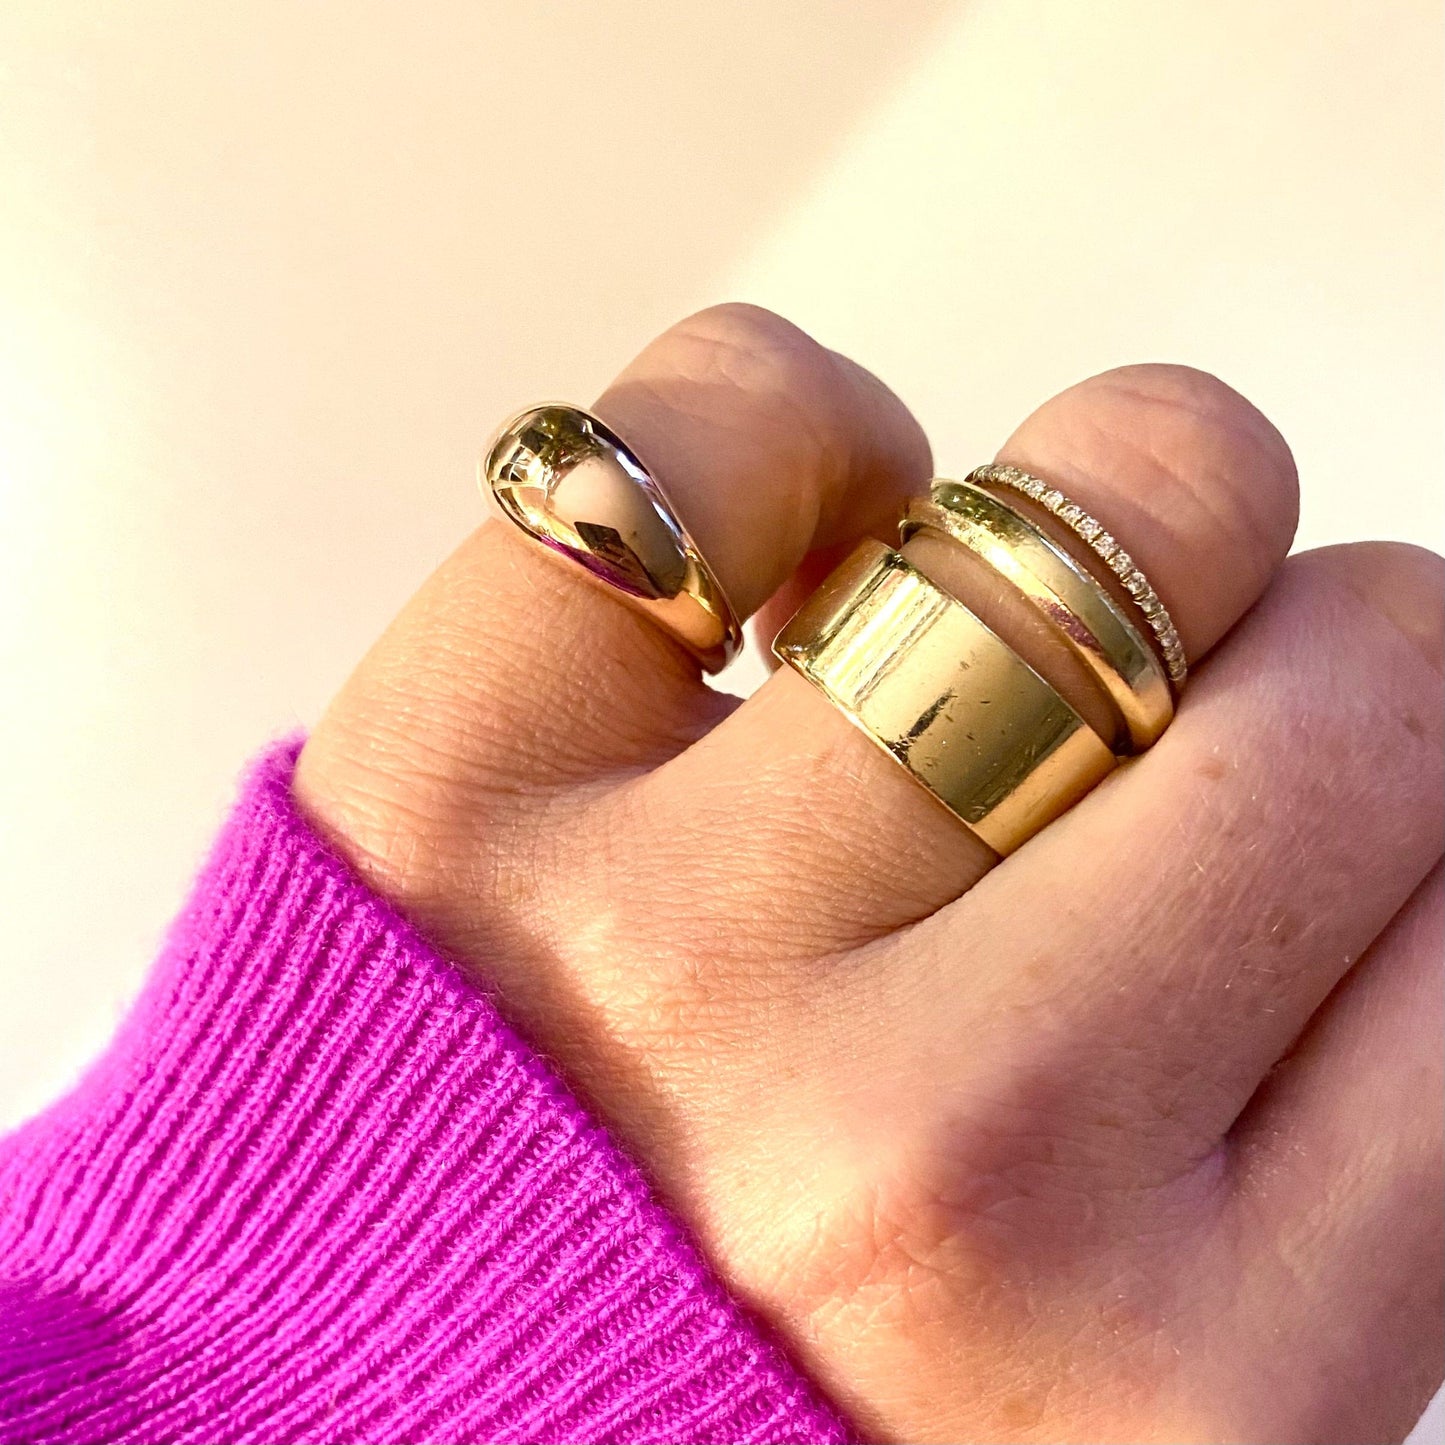 The Duomo Solid Gold Dome Ring